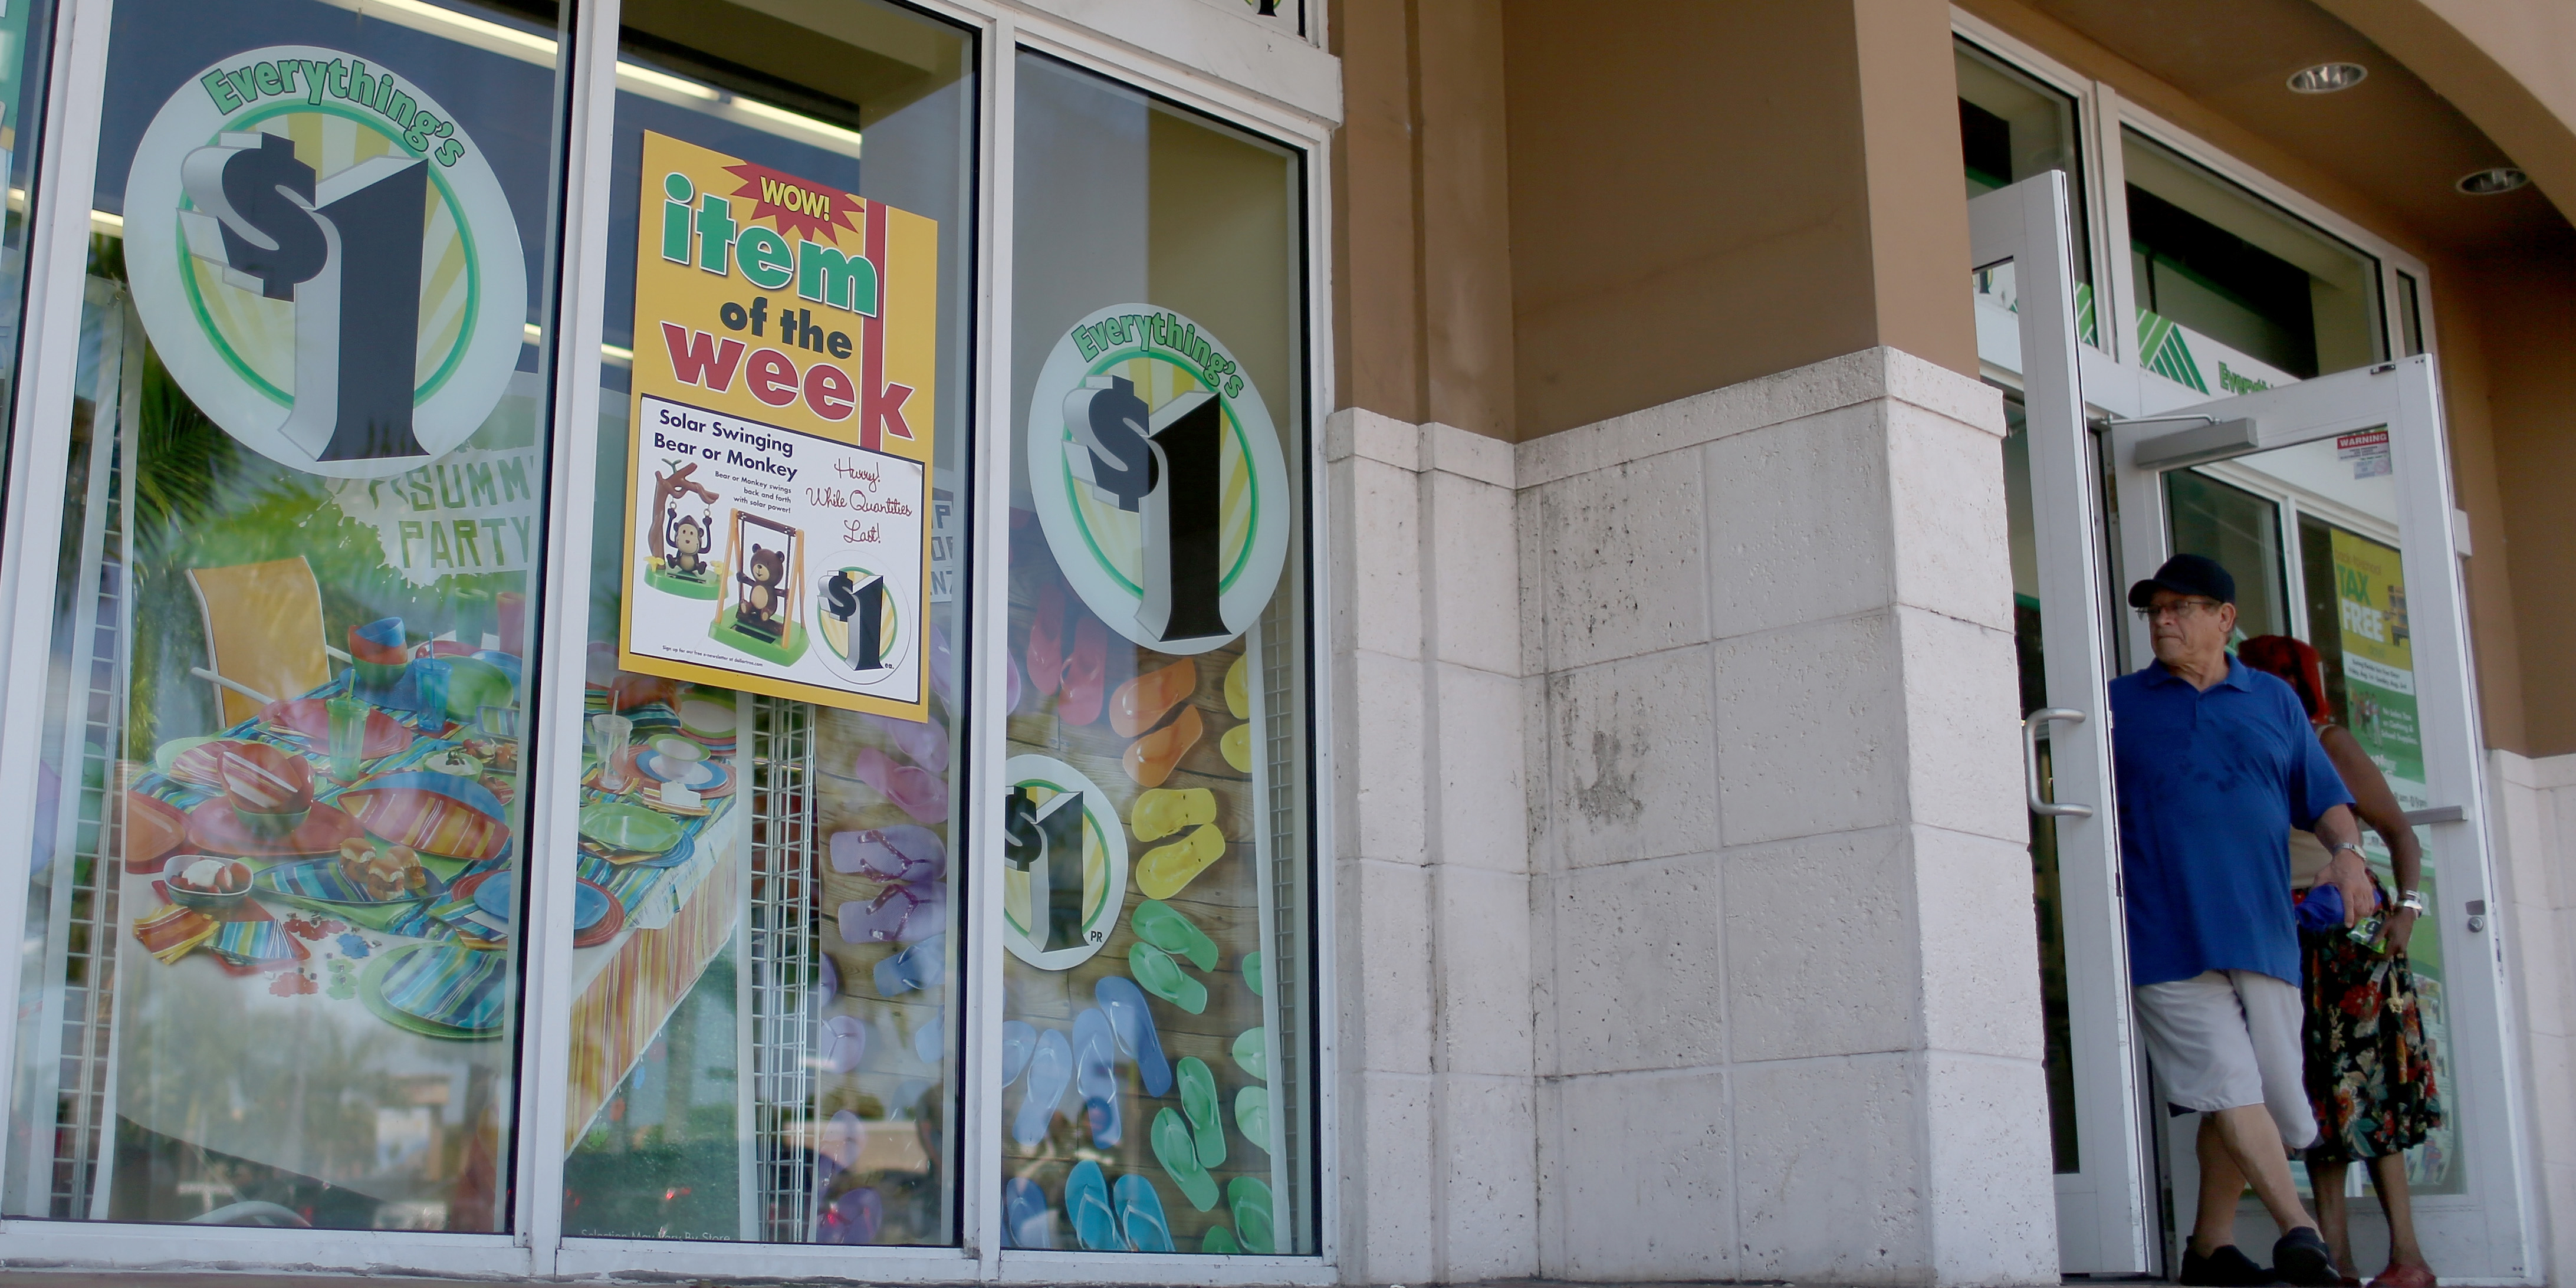 MIAMI, FL - JULY 28:  A Dollar Tree store is seen on July 28, 2014 in Miami, Florida.   Dollar Tree announced it will buy Family Dollar Stores for about $8.5 billion in cash and stock.  (Photo by Joe Raedle/Getty Images)